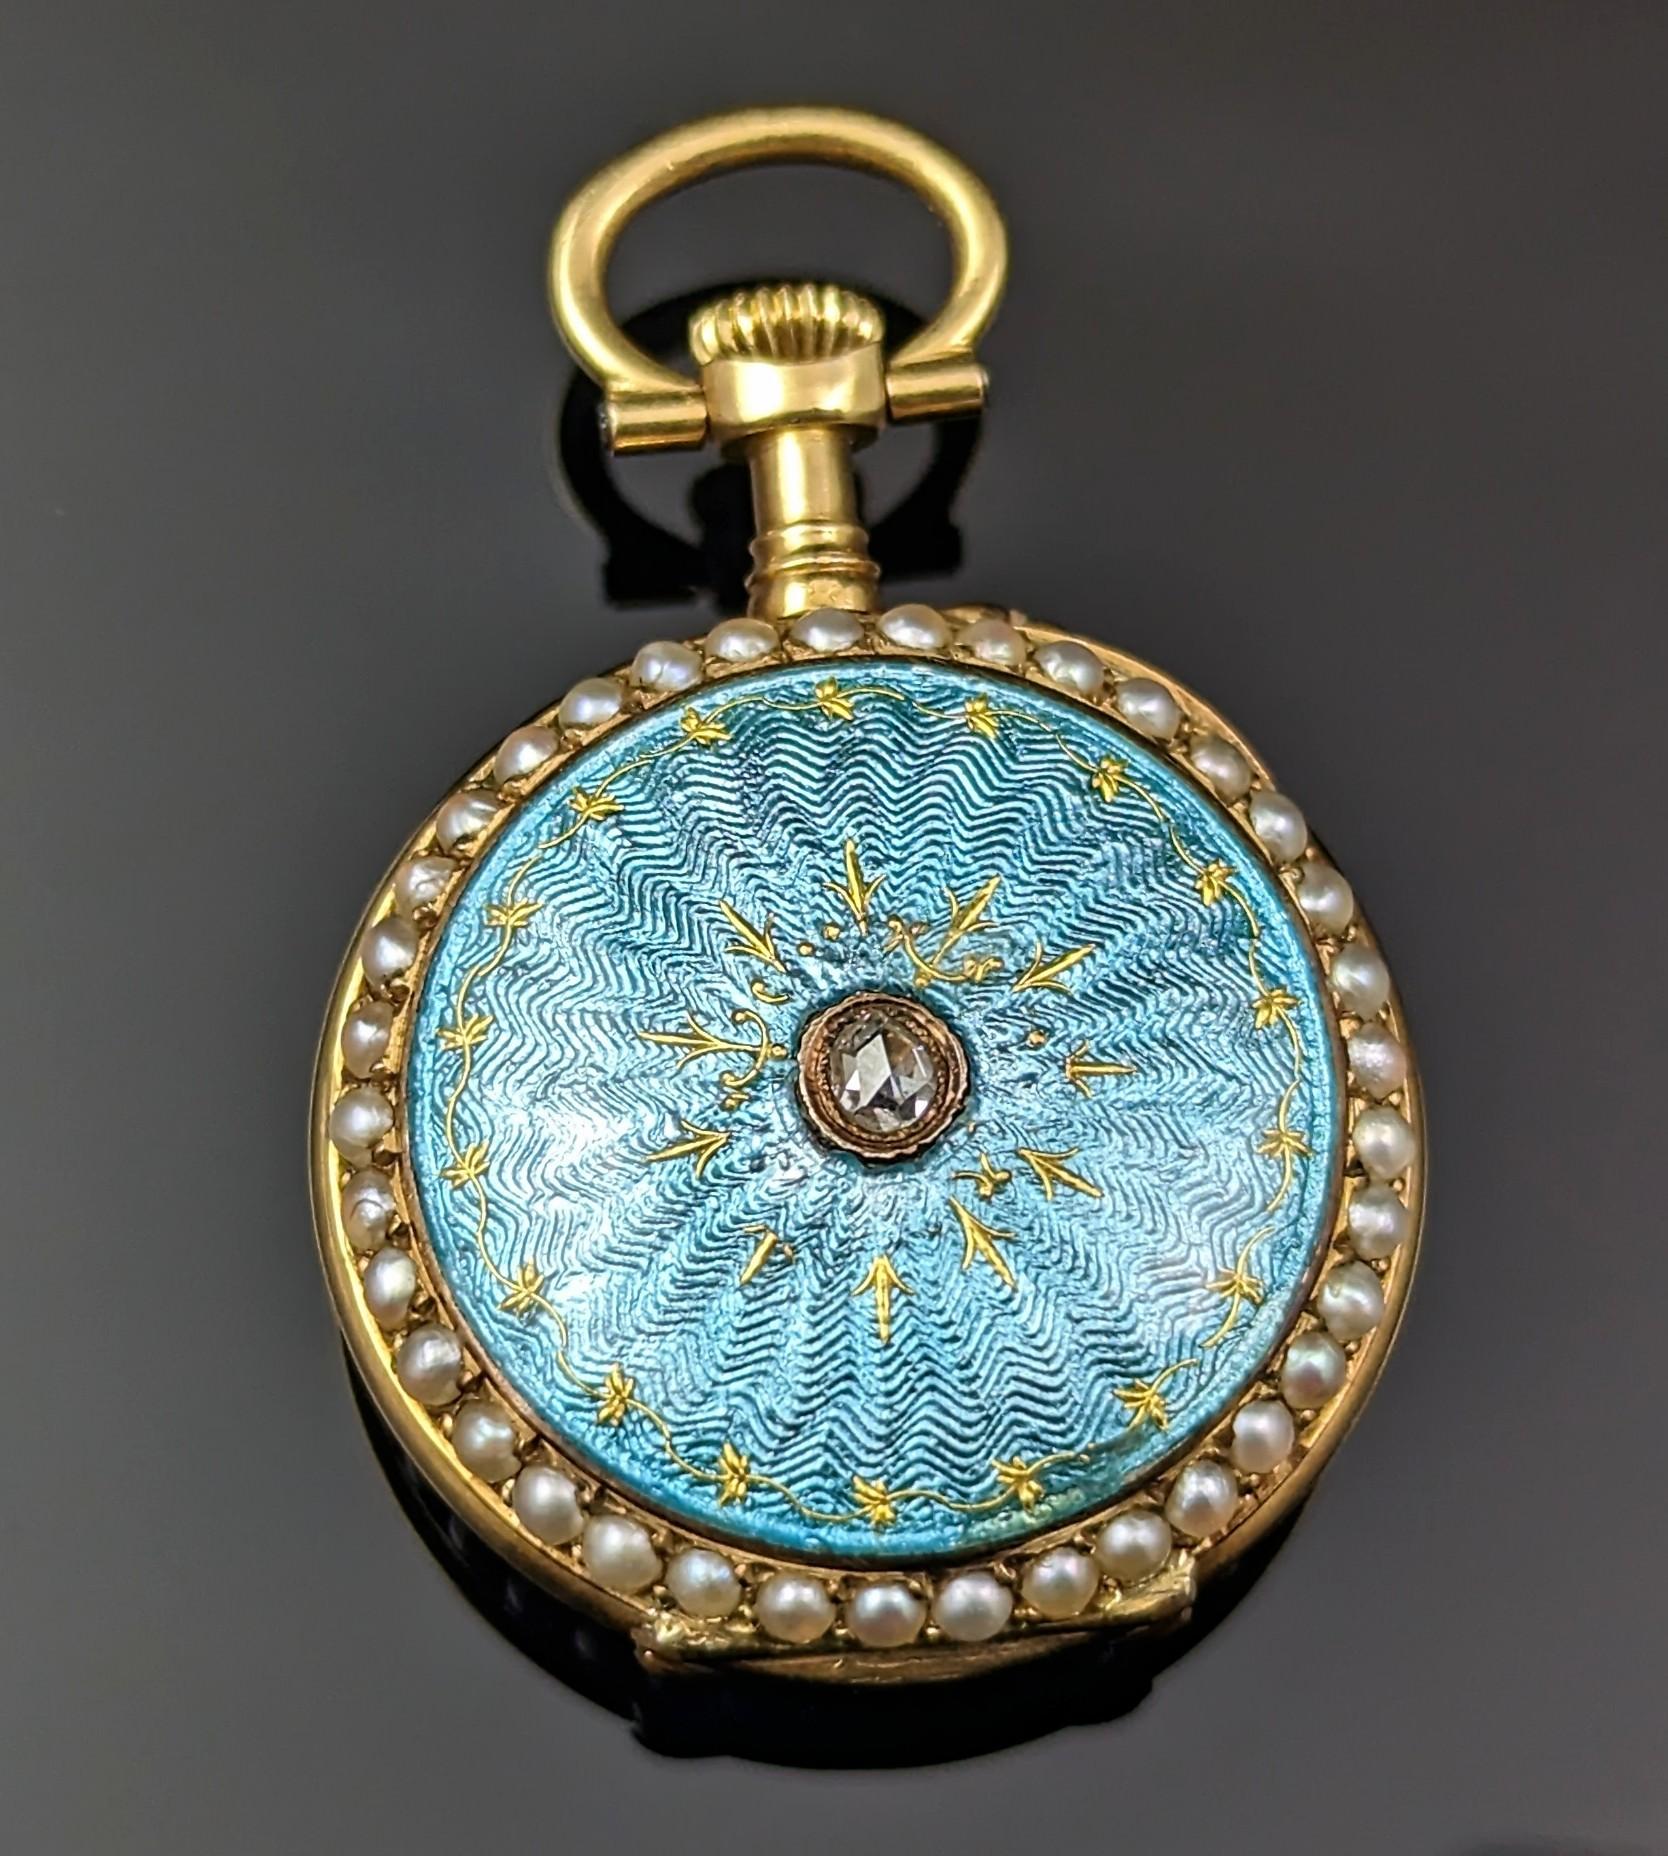 Antique Diamond and Pearl Fob Watch, 18 Karat Gold, Guilloche Enamel 5